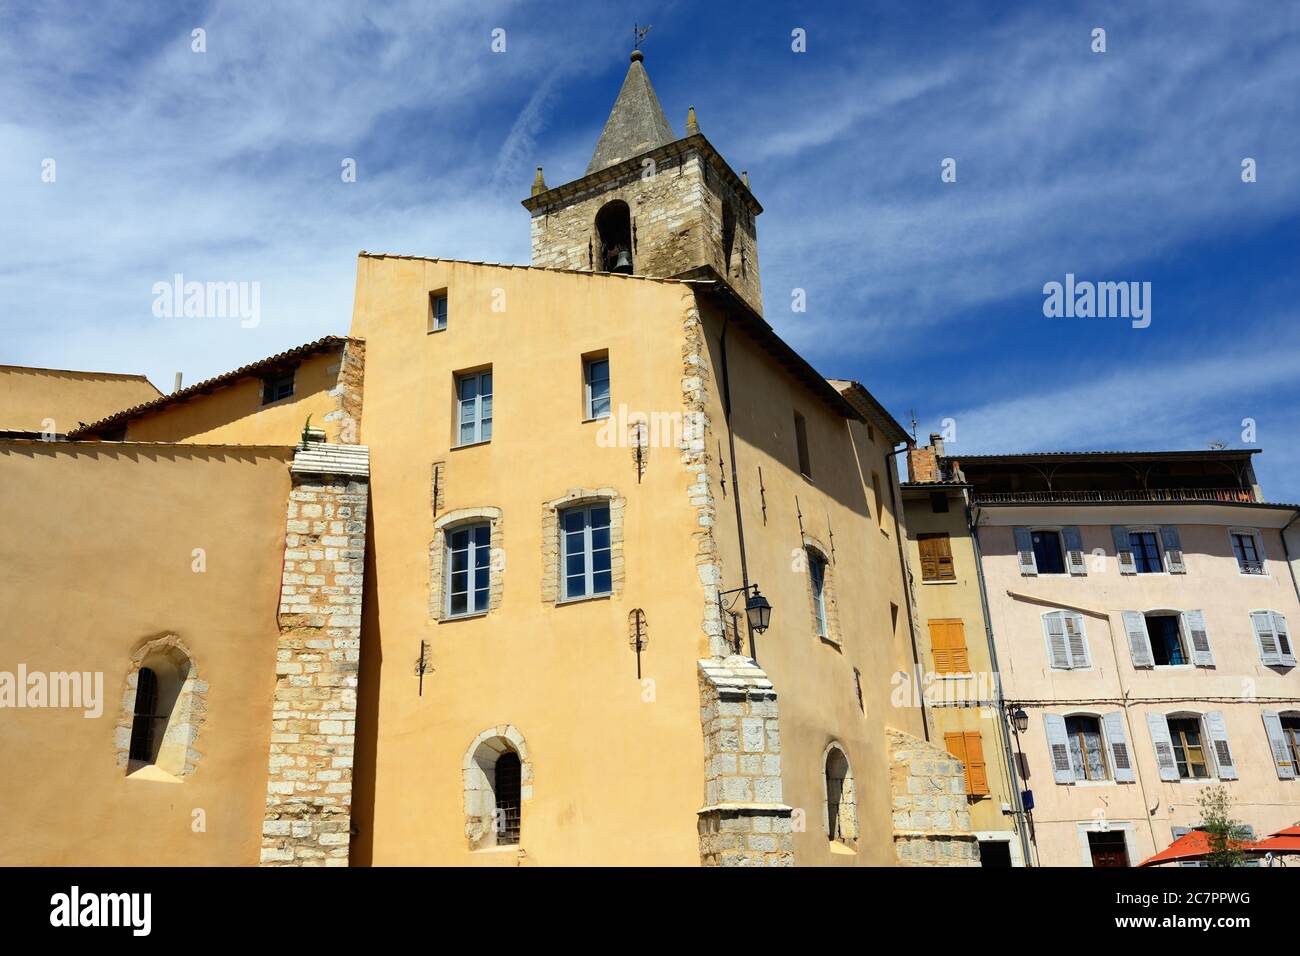 The Beautiful Medieval Village Riez, Provence, France Stock Photo